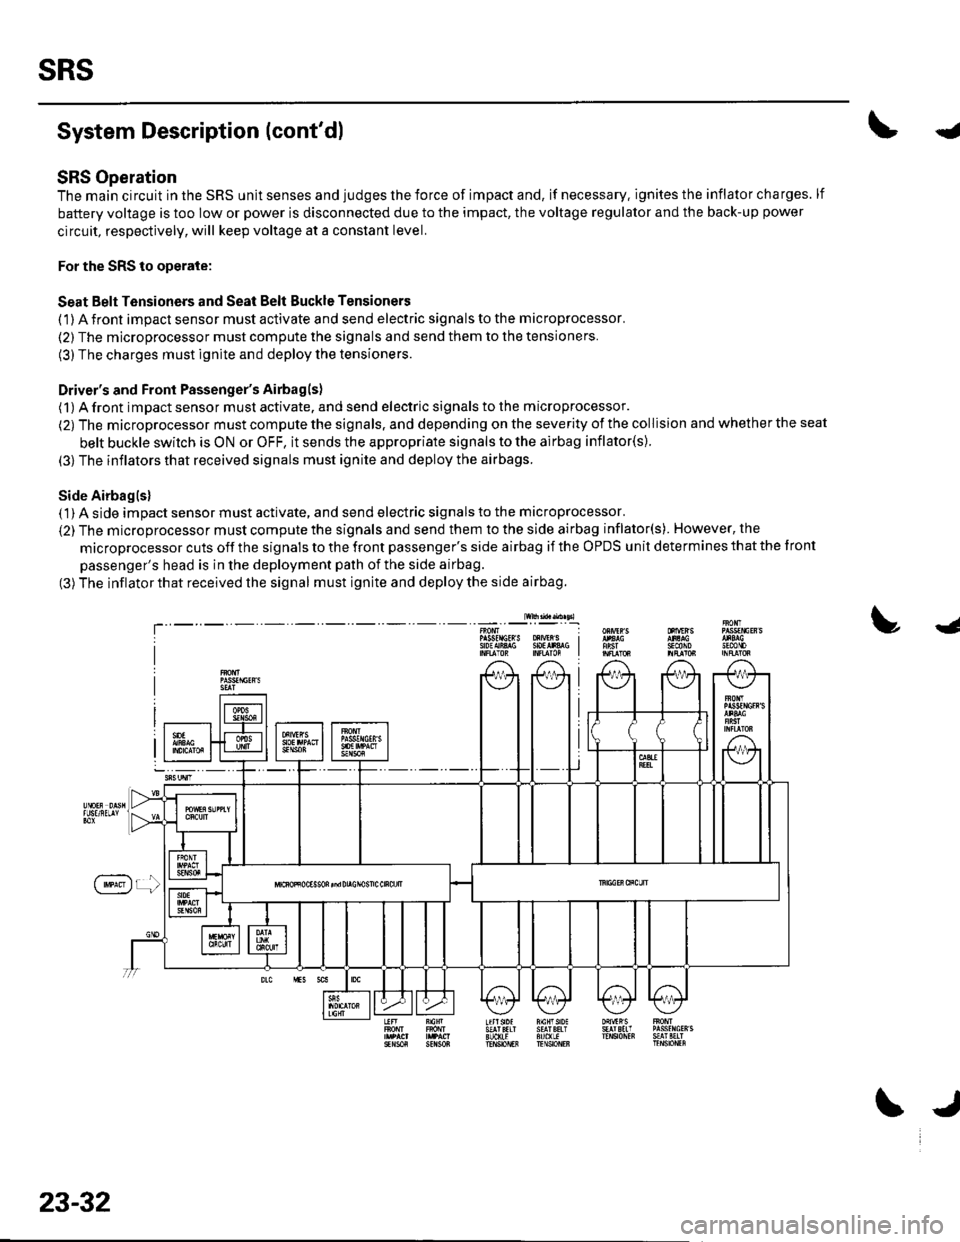 HONDA CIVIC 2002 7.G Workshop Manual sRs
System Description (contdl
SRS Operation
The main circuit in the SRS unit senses and judges the force of impact and, if necessary. ignites the inflator charges. lf
battery voltage is too low or p